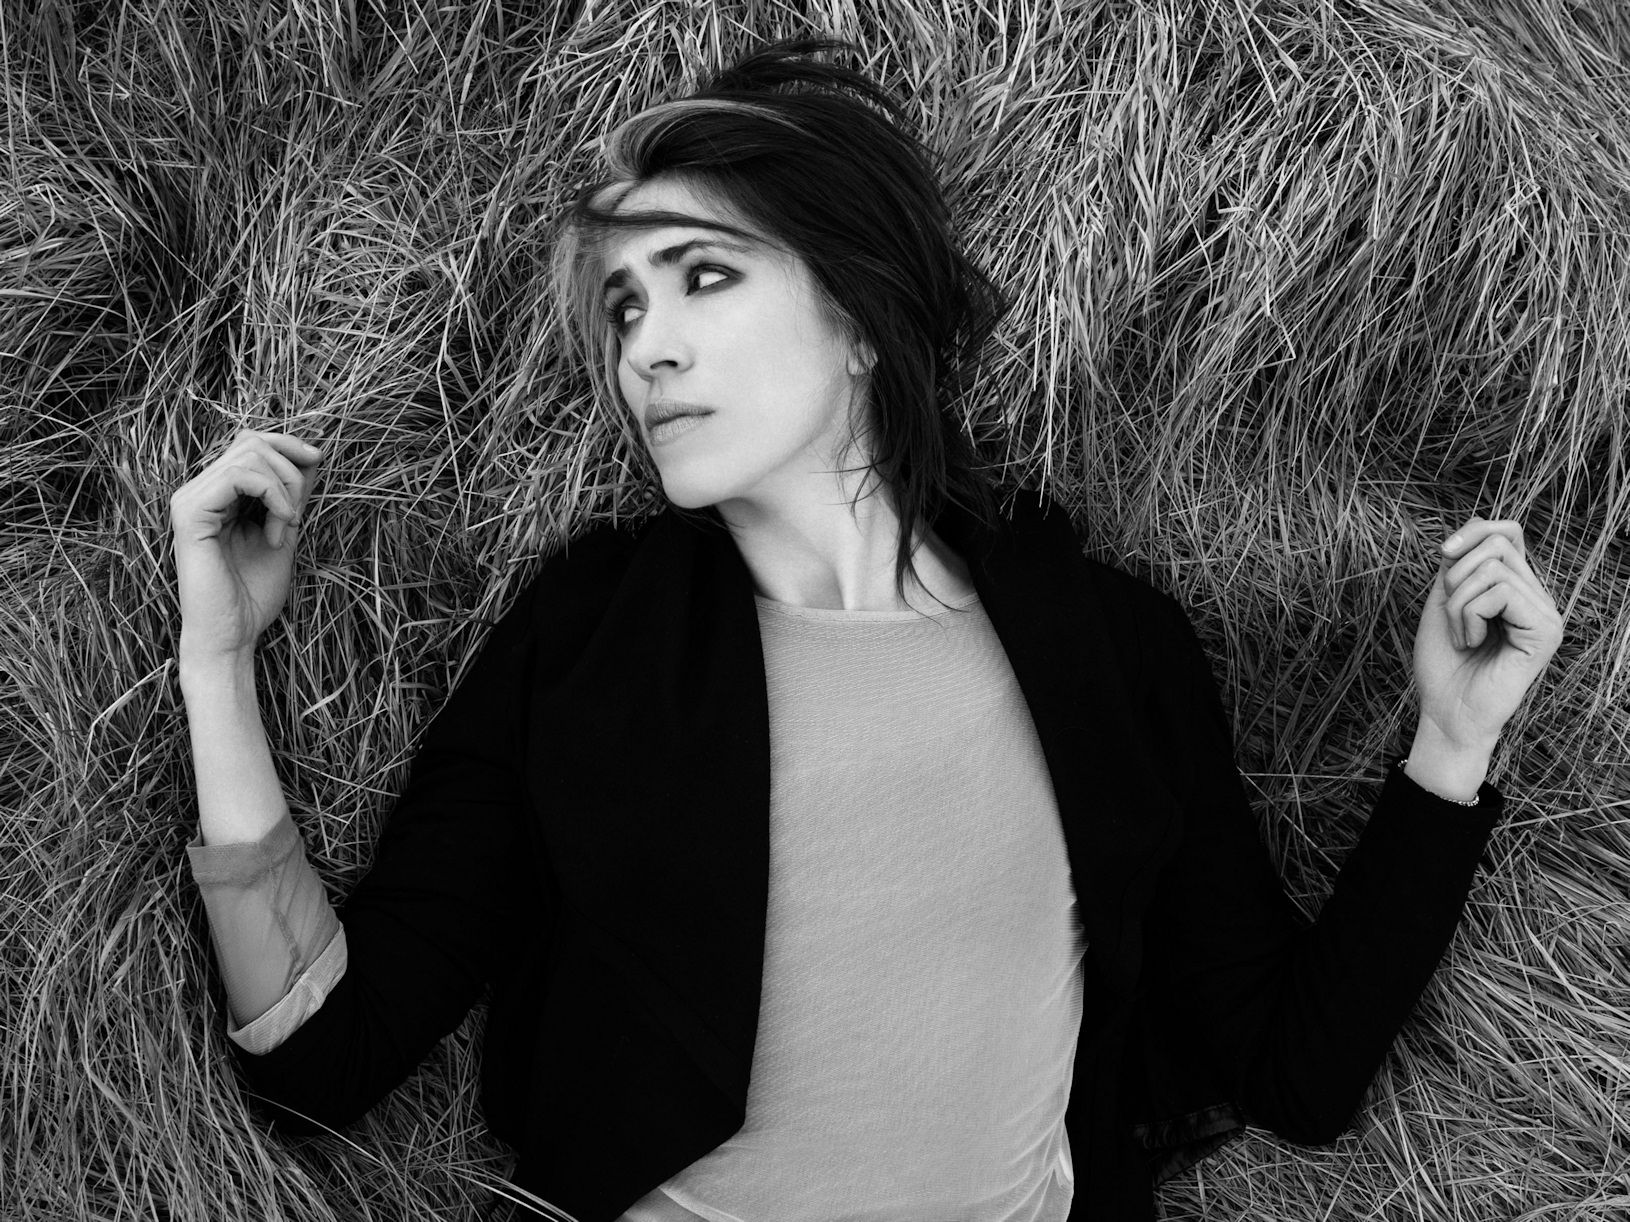 Imogen Heap on Hide and Seek's life from The OC to Normal People